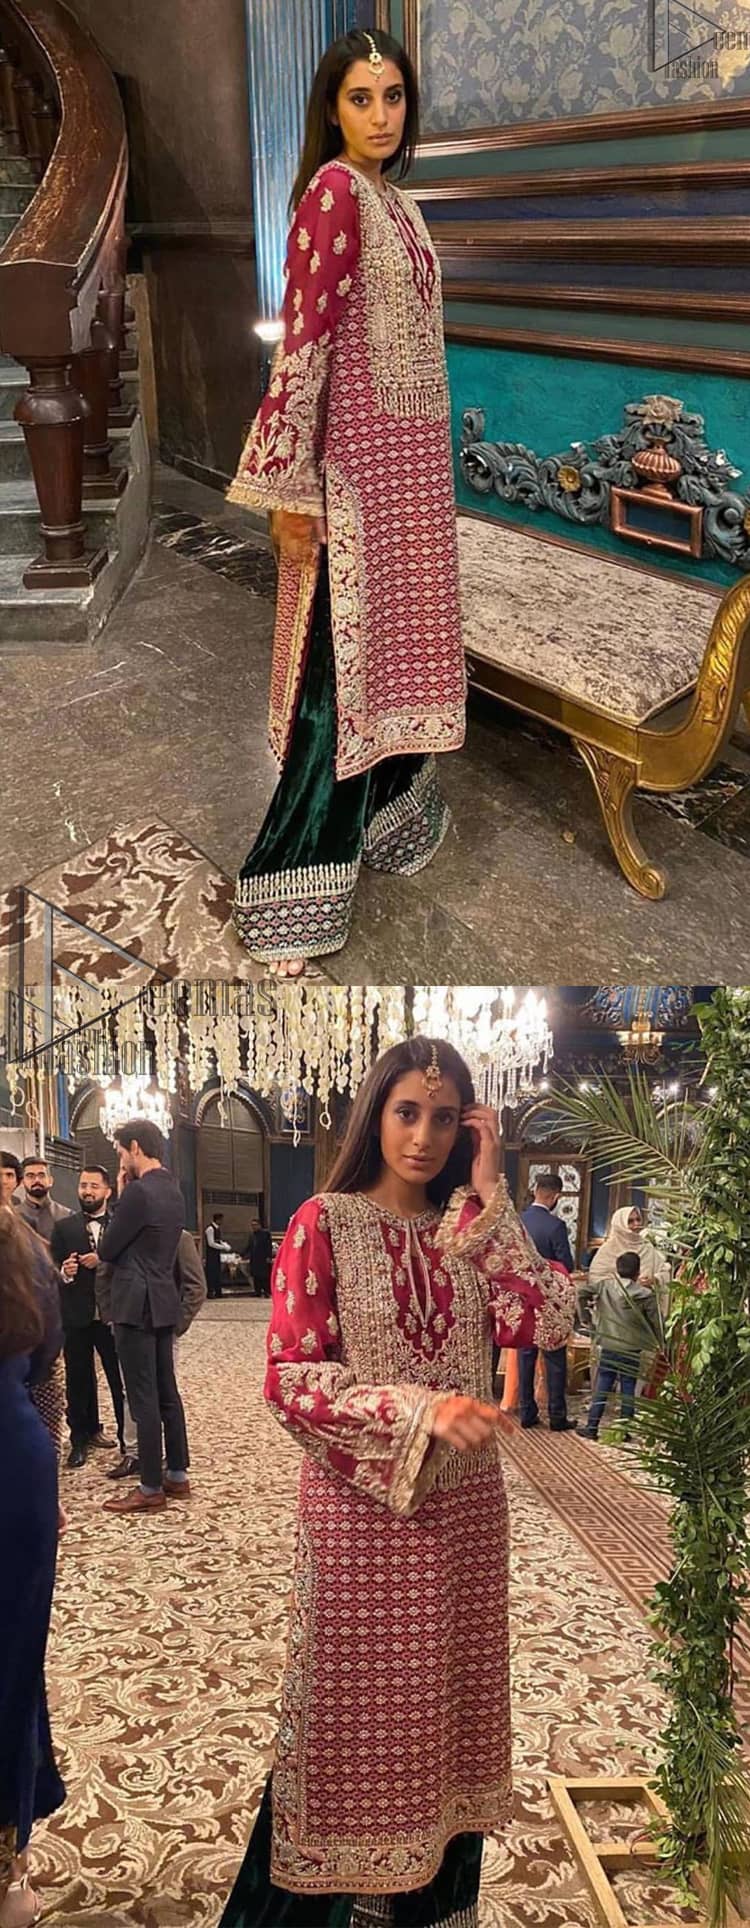 The new season is all about making a statement. An sensational affair so timeless and magnificent, beautifully crafted in hues of golden. Embellishd bodice with zardozi work and bell sleeves adorned with tassels finishing make the outfit more beautiful. Balance the look with bottle green palazzo pants highlighted with embroidered borders at the bottom and red organza dupatta with sequins spray all over. Craftmanship and skills you've never witnessed before.